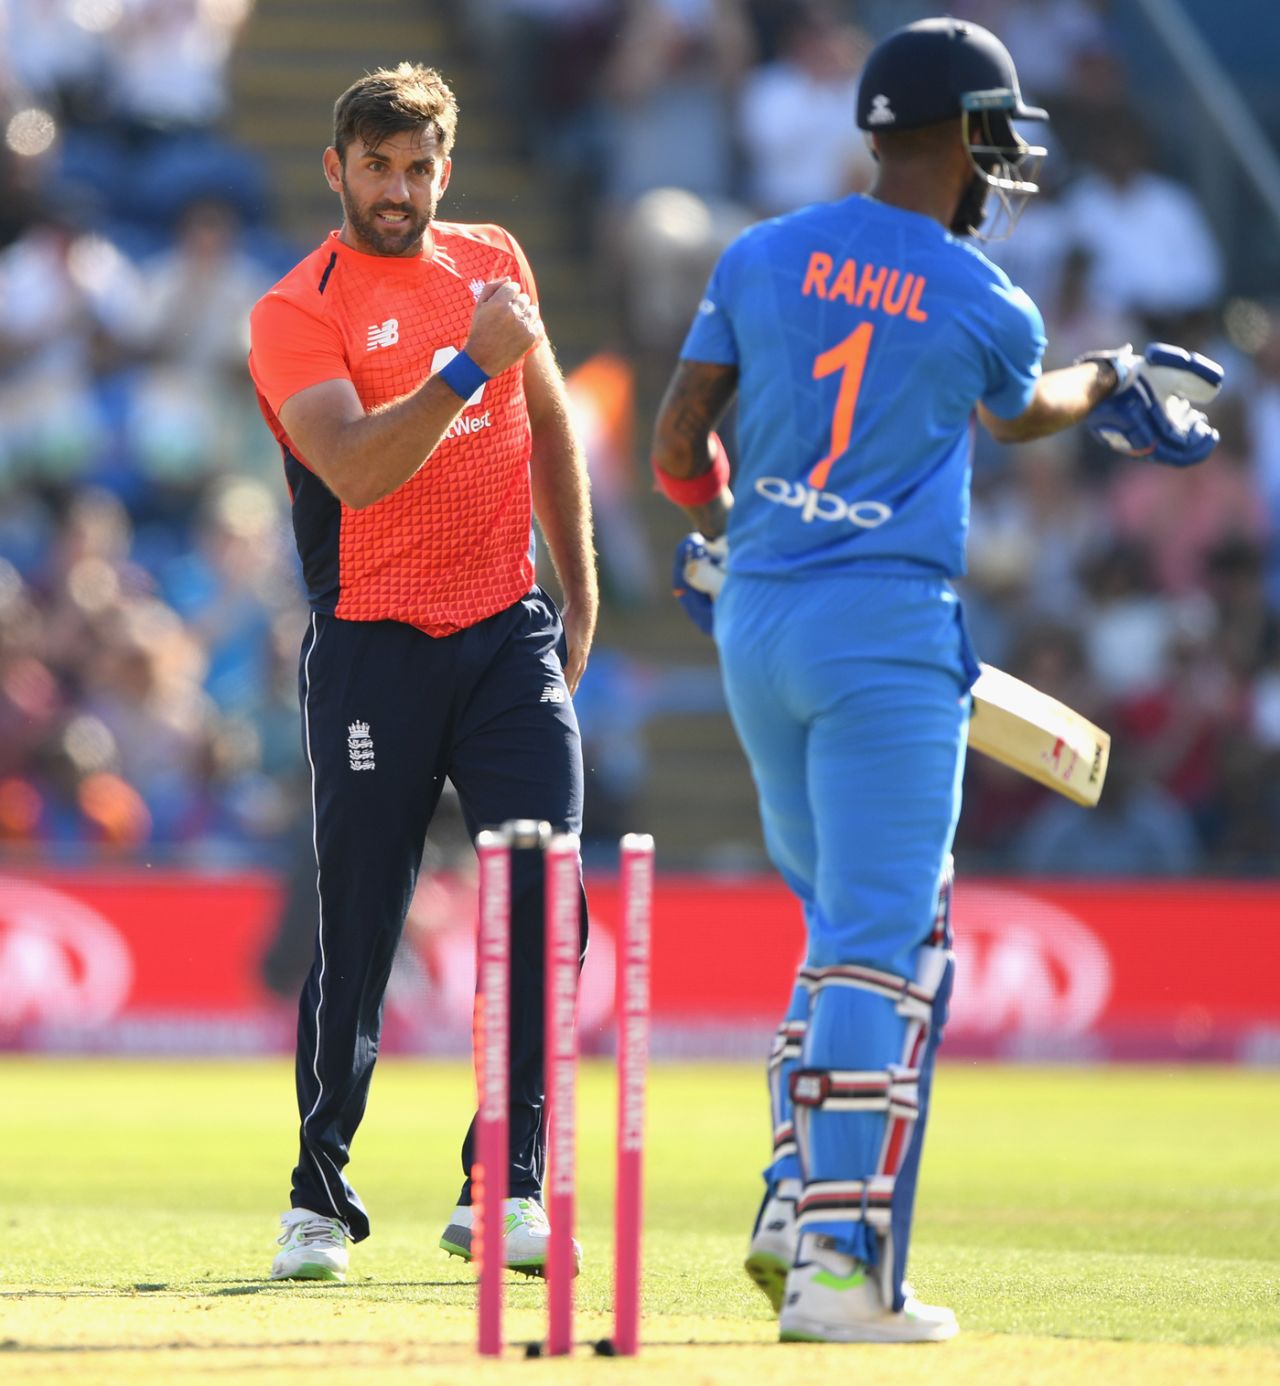 Liam Plunkett gives KL Rahul an understated send-off, England v India, 2nd T20I, Cardiff, July 6, 2018